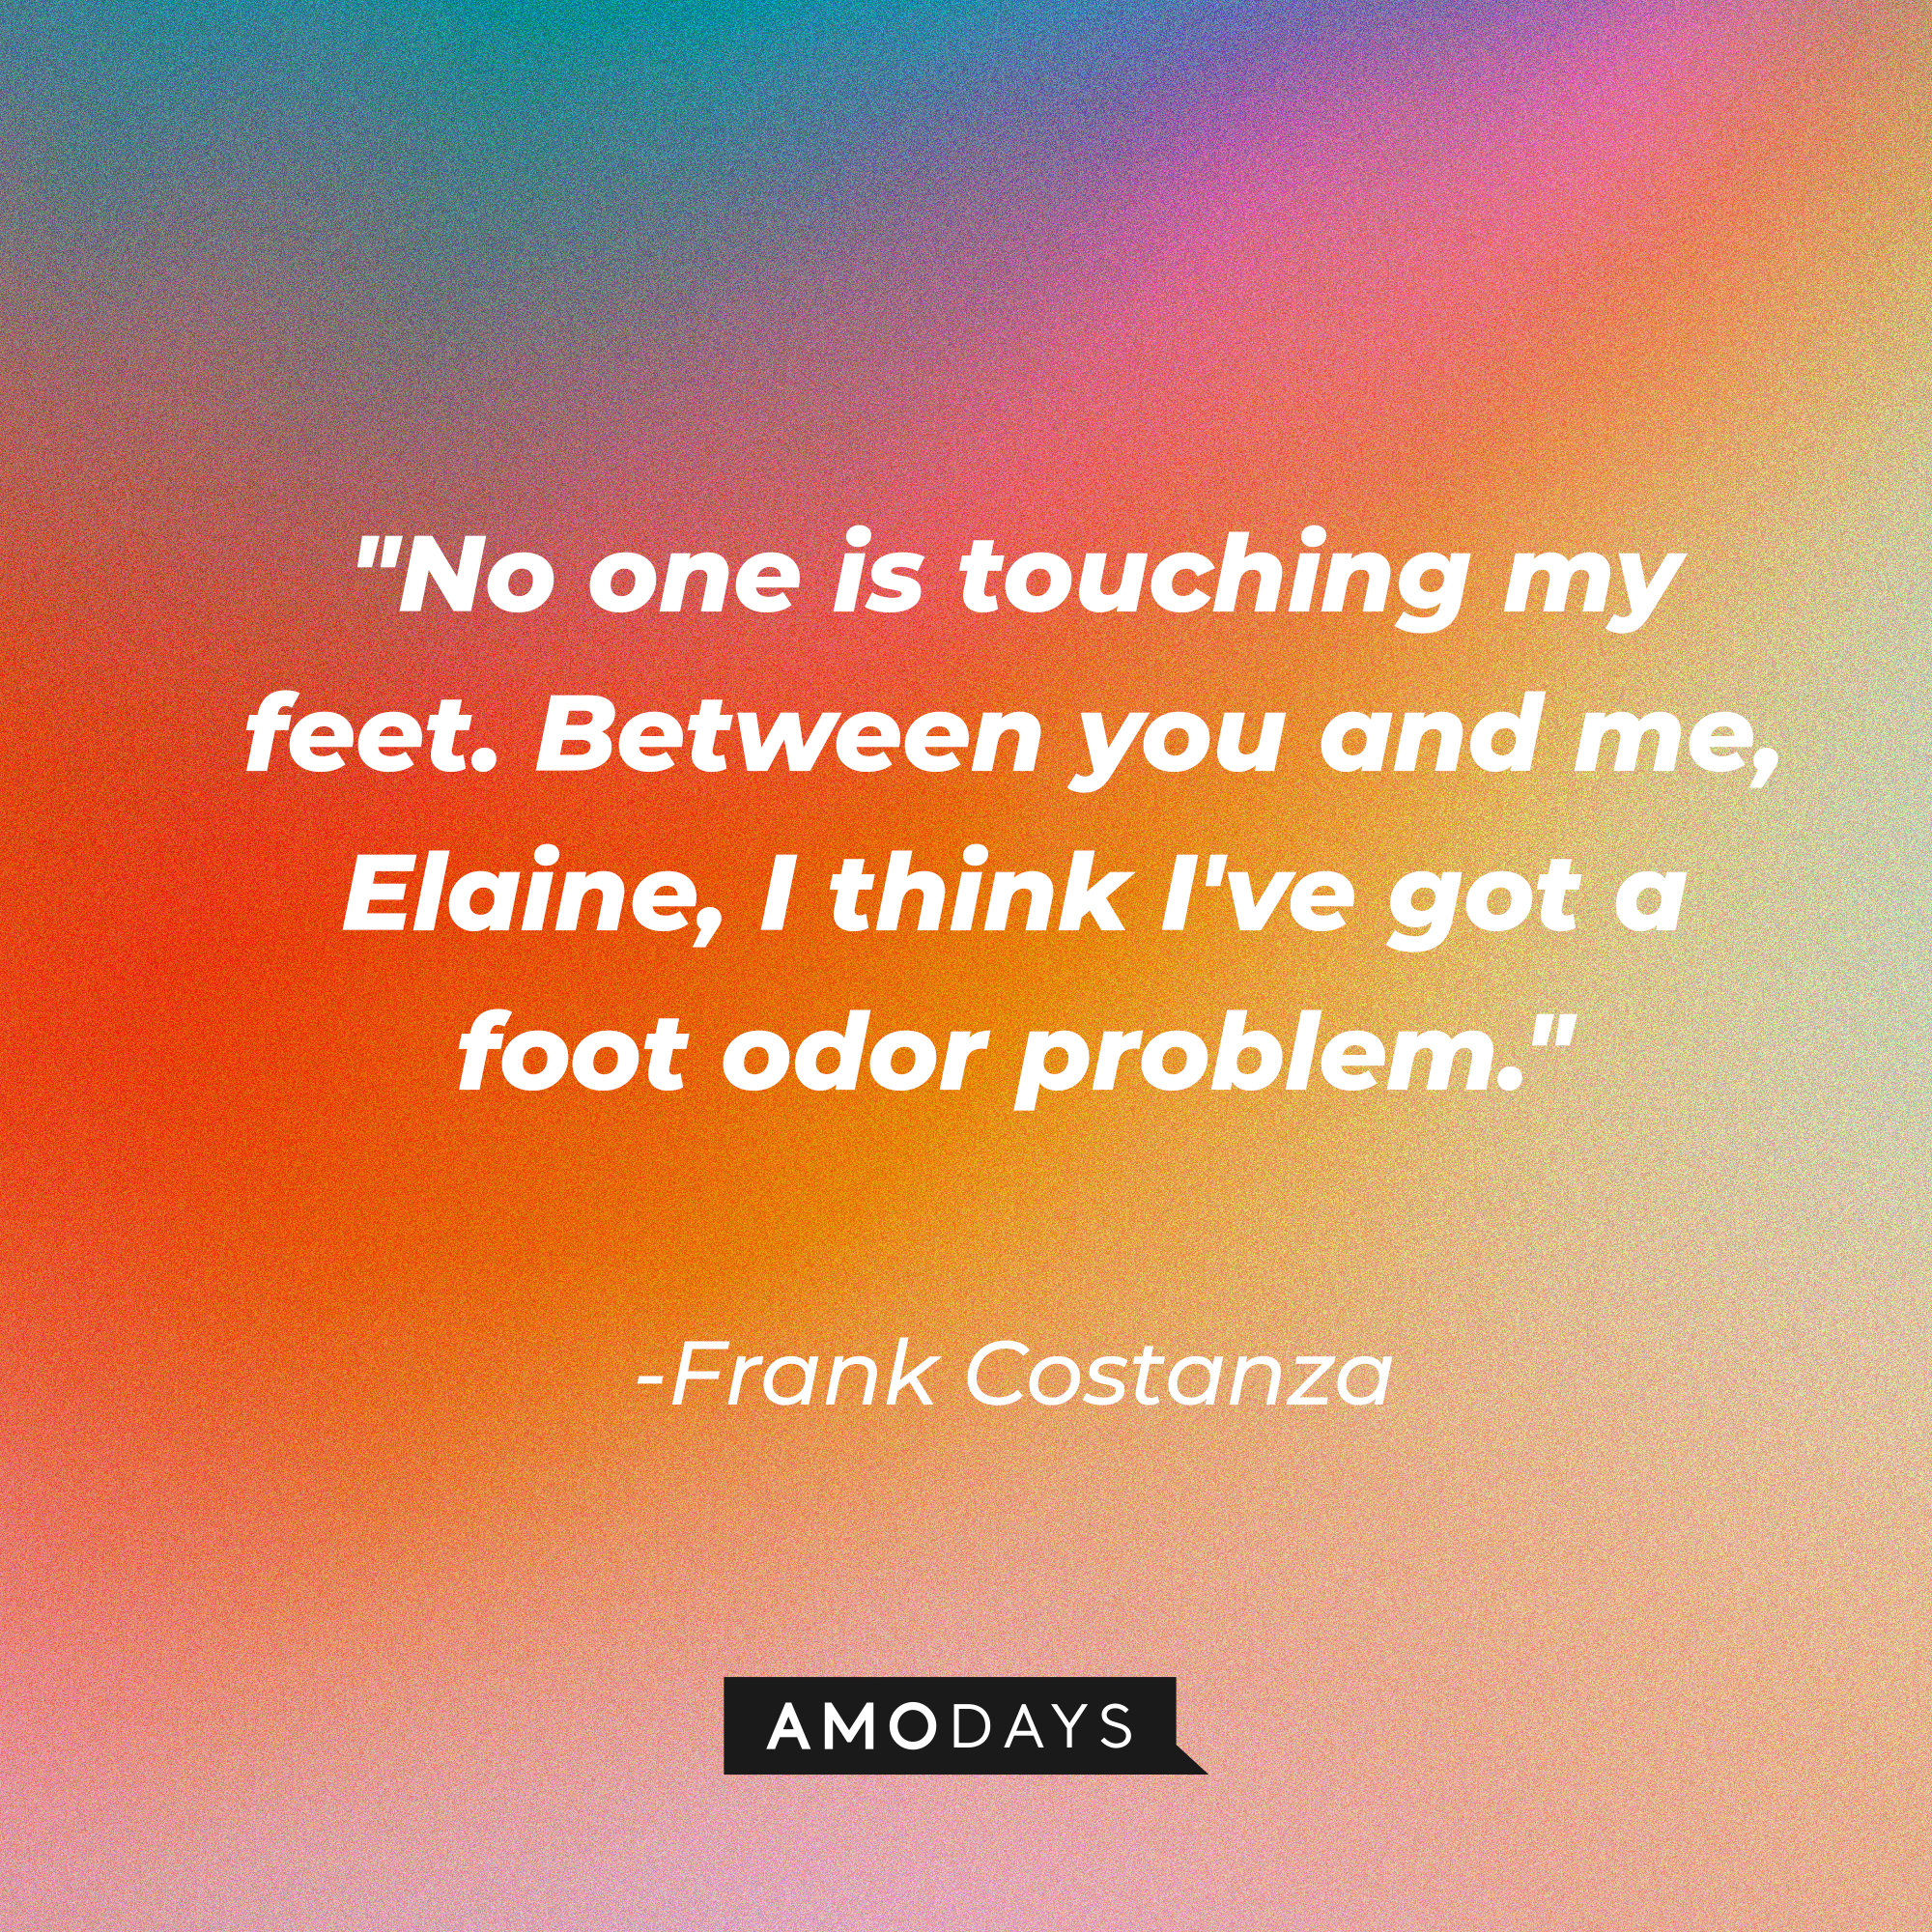 A photo with Frank Costanza's quote, "No one is touching my feet. Between you and me, Elaine, I think I've got a foot odor problem." | Source: Amodays